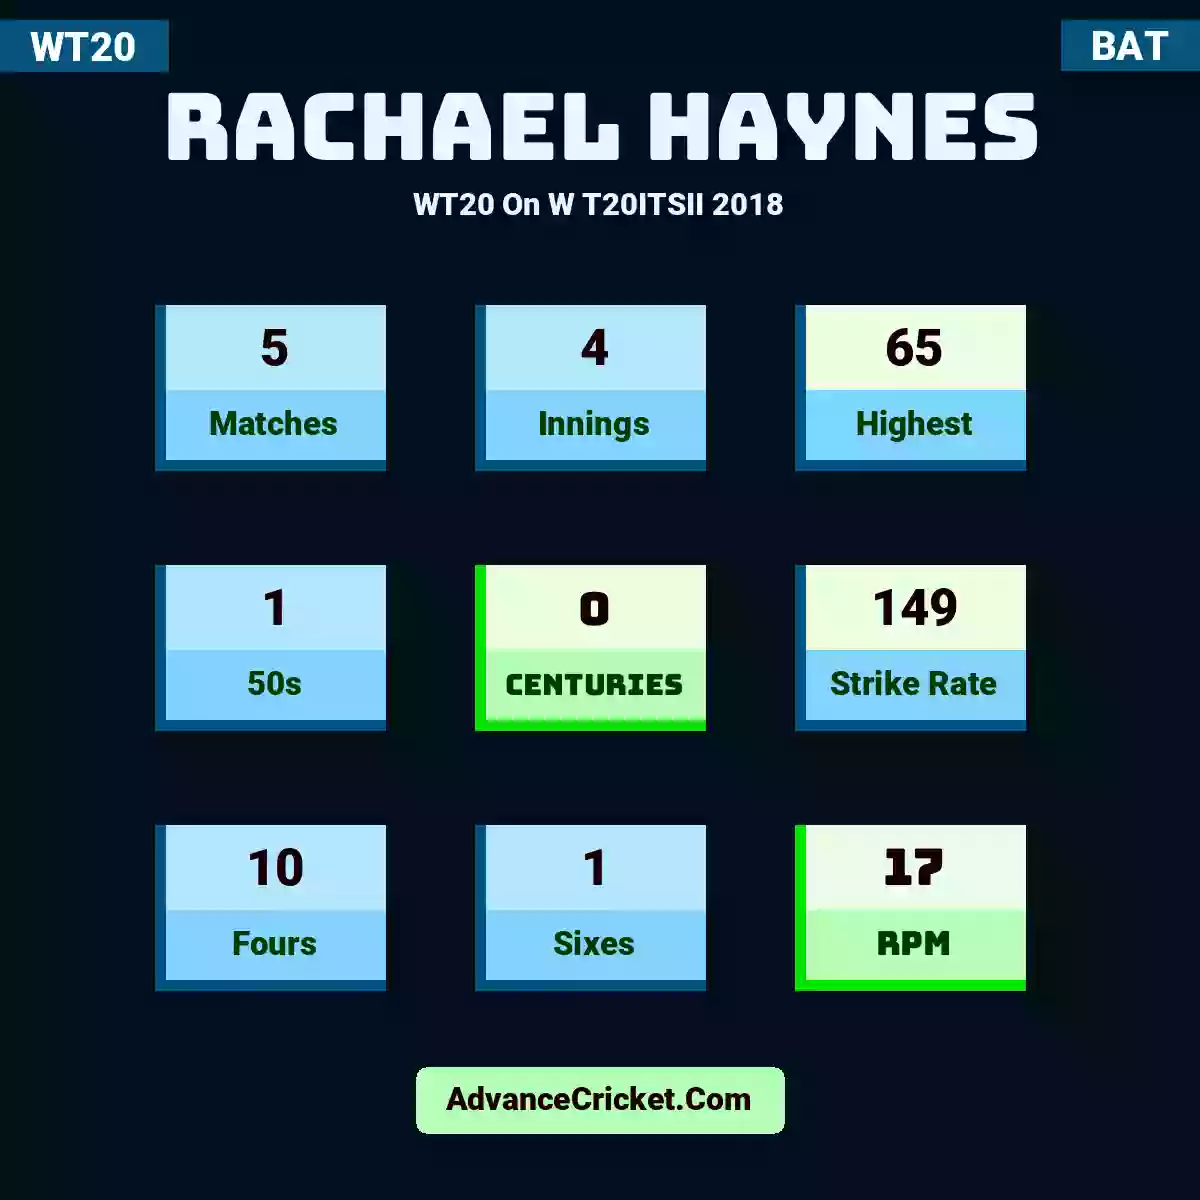 Rachael Haynes WT20  On W T20ITSII 2018, Rachael Haynes played 5 matches, scored 65 runs as highest, 1 half-centuries, and 0 centuries, with a strike rate of 149. R.Haynes hit 10 fours and 1 sixes, with an RPM of 17.